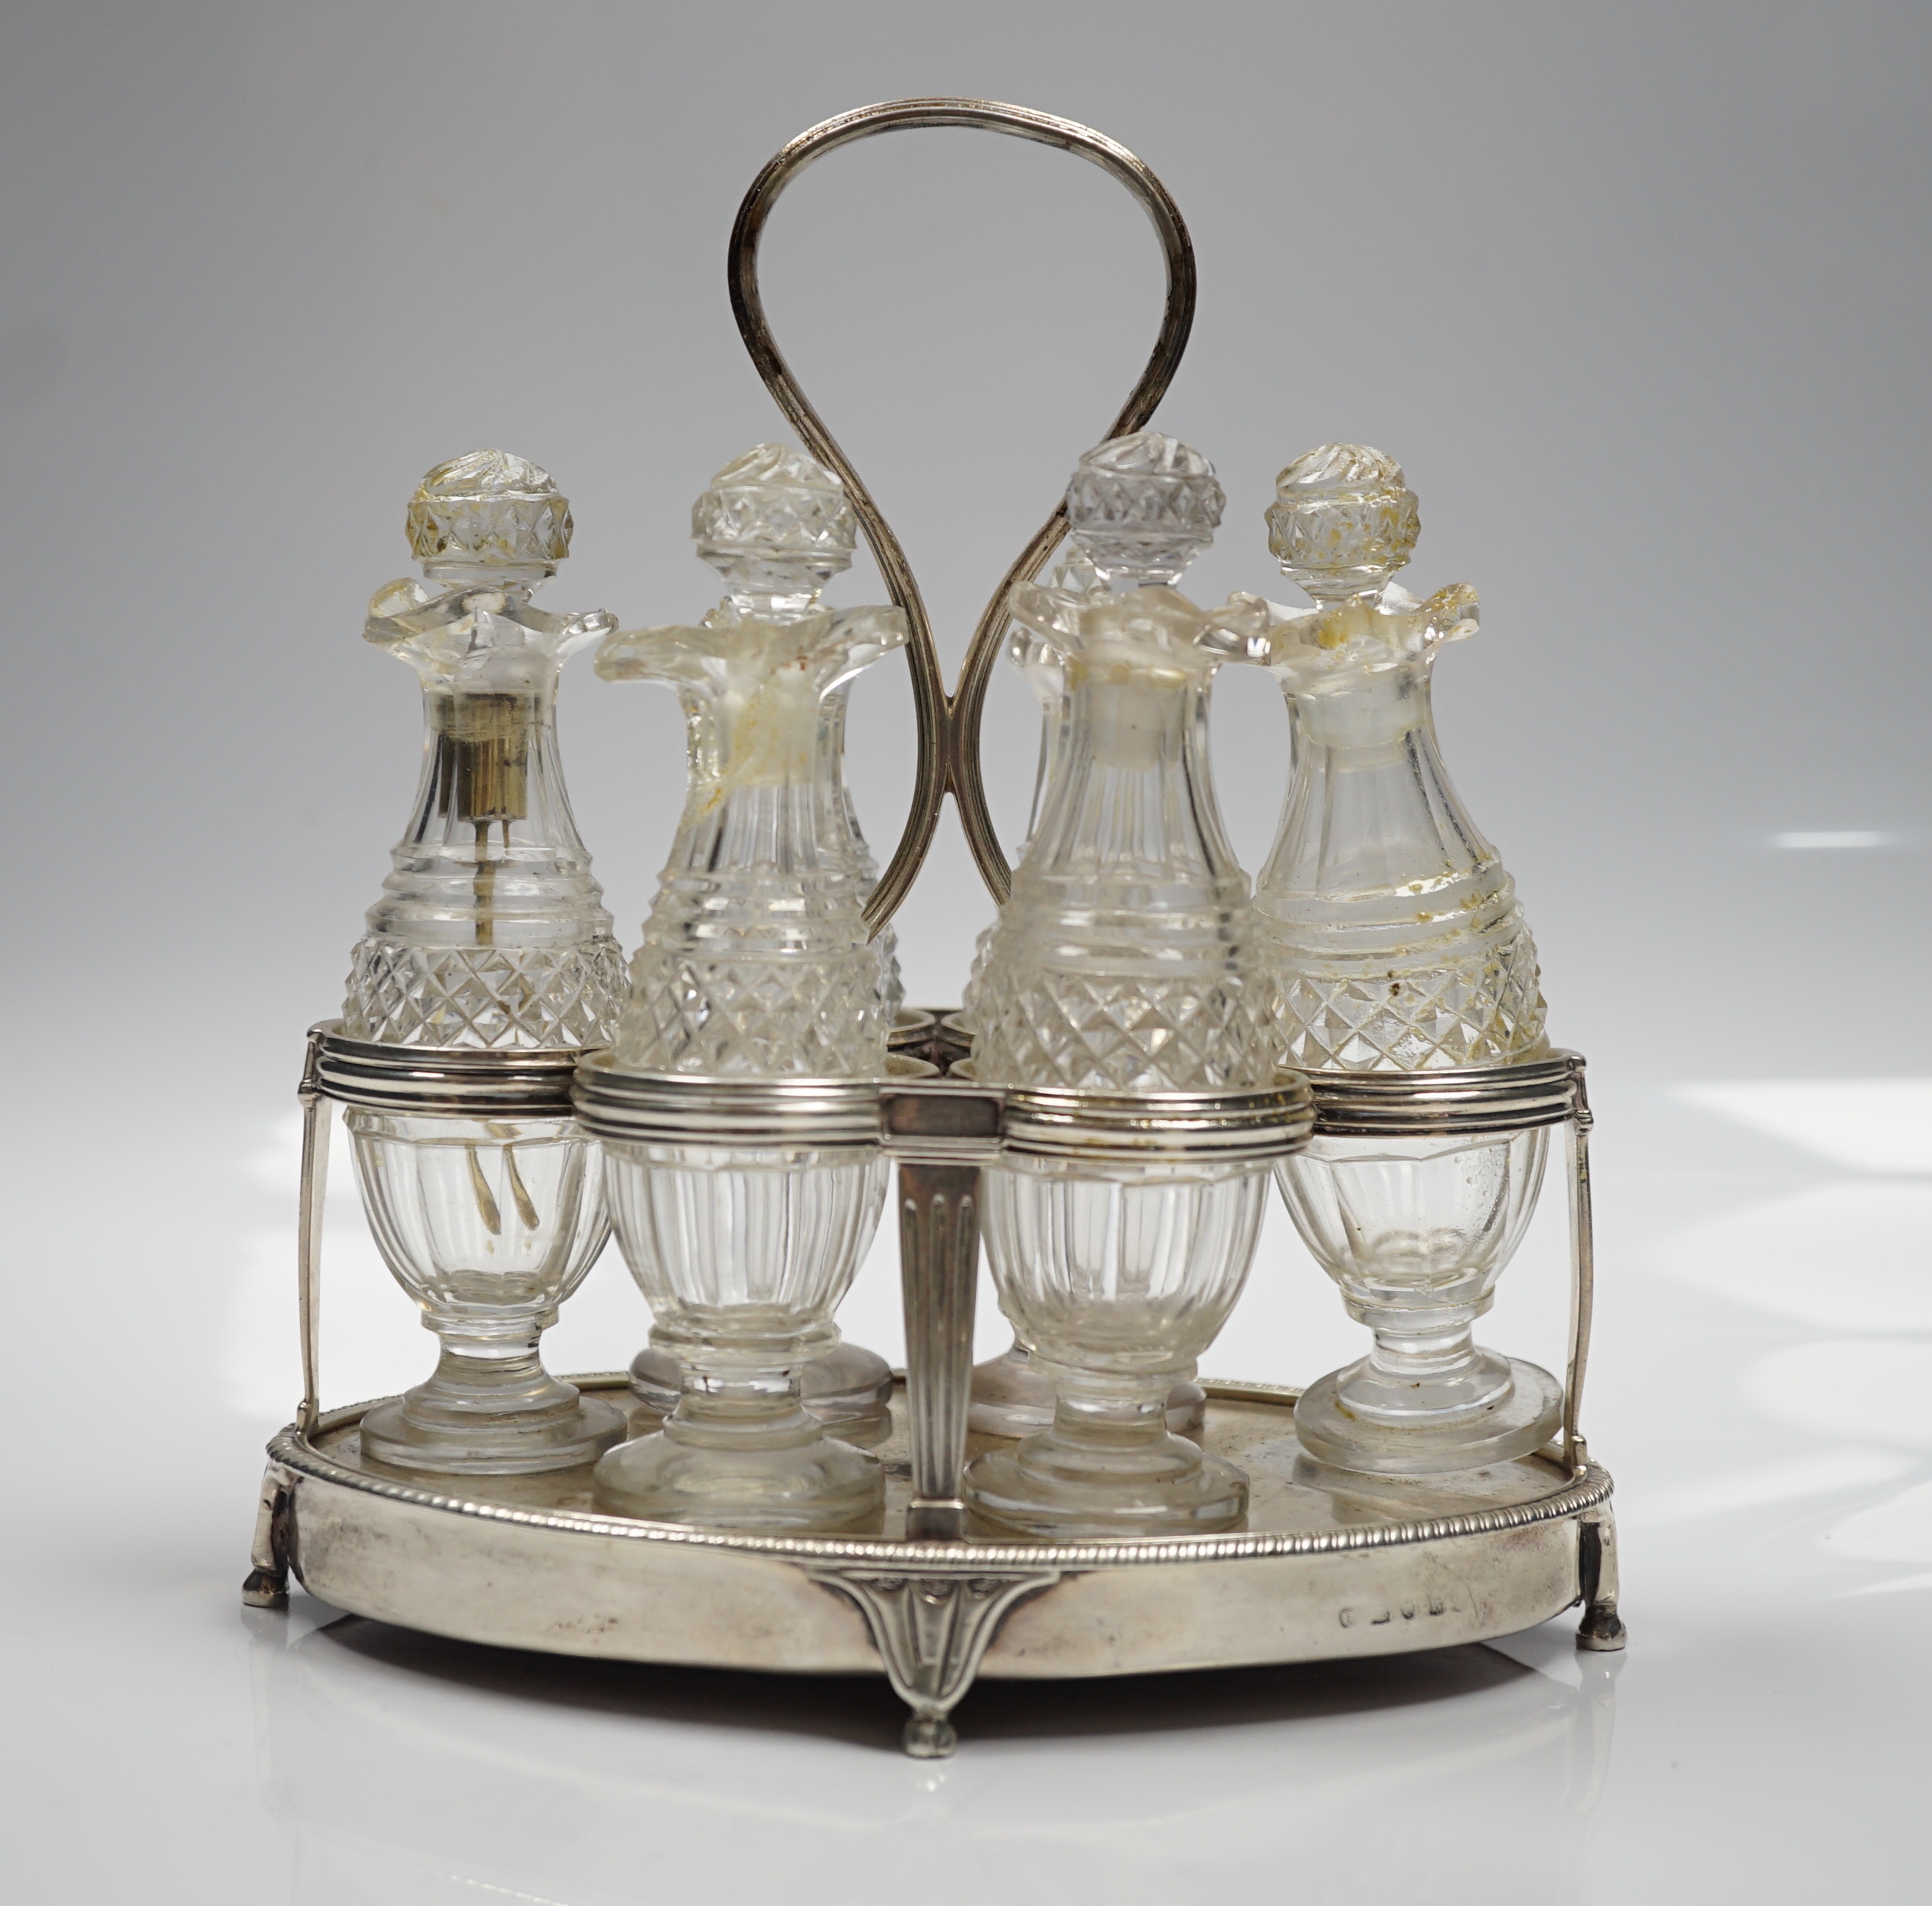 A George III silver mounted oval cruet stand, maker P?, London, 1802, with reeded ring handle and